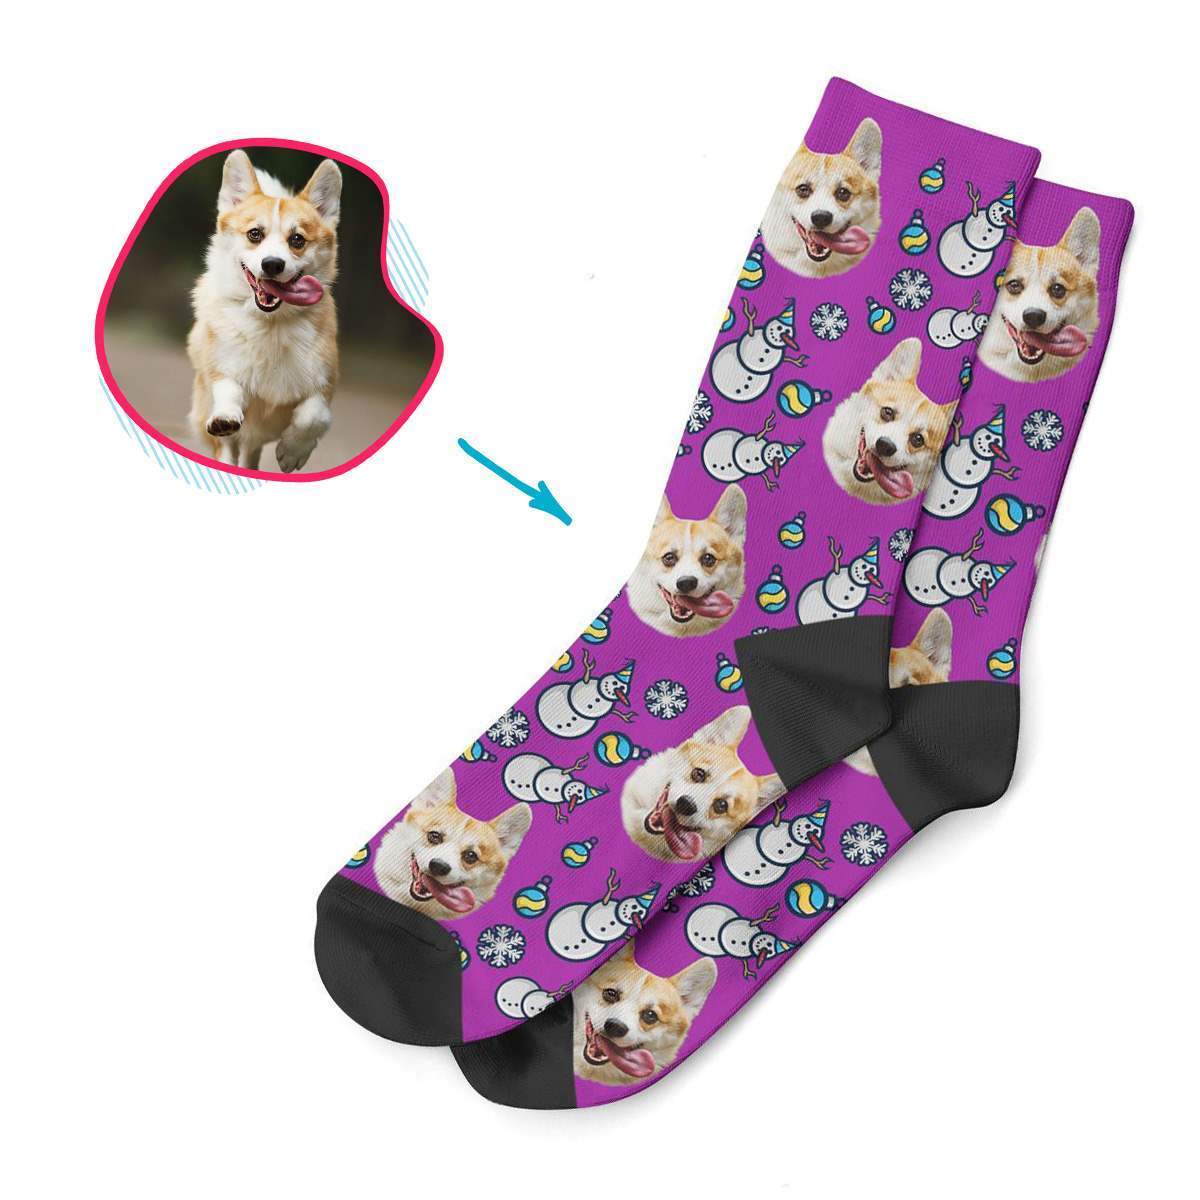 purple Snowman socks personalized with photo of face printed on them